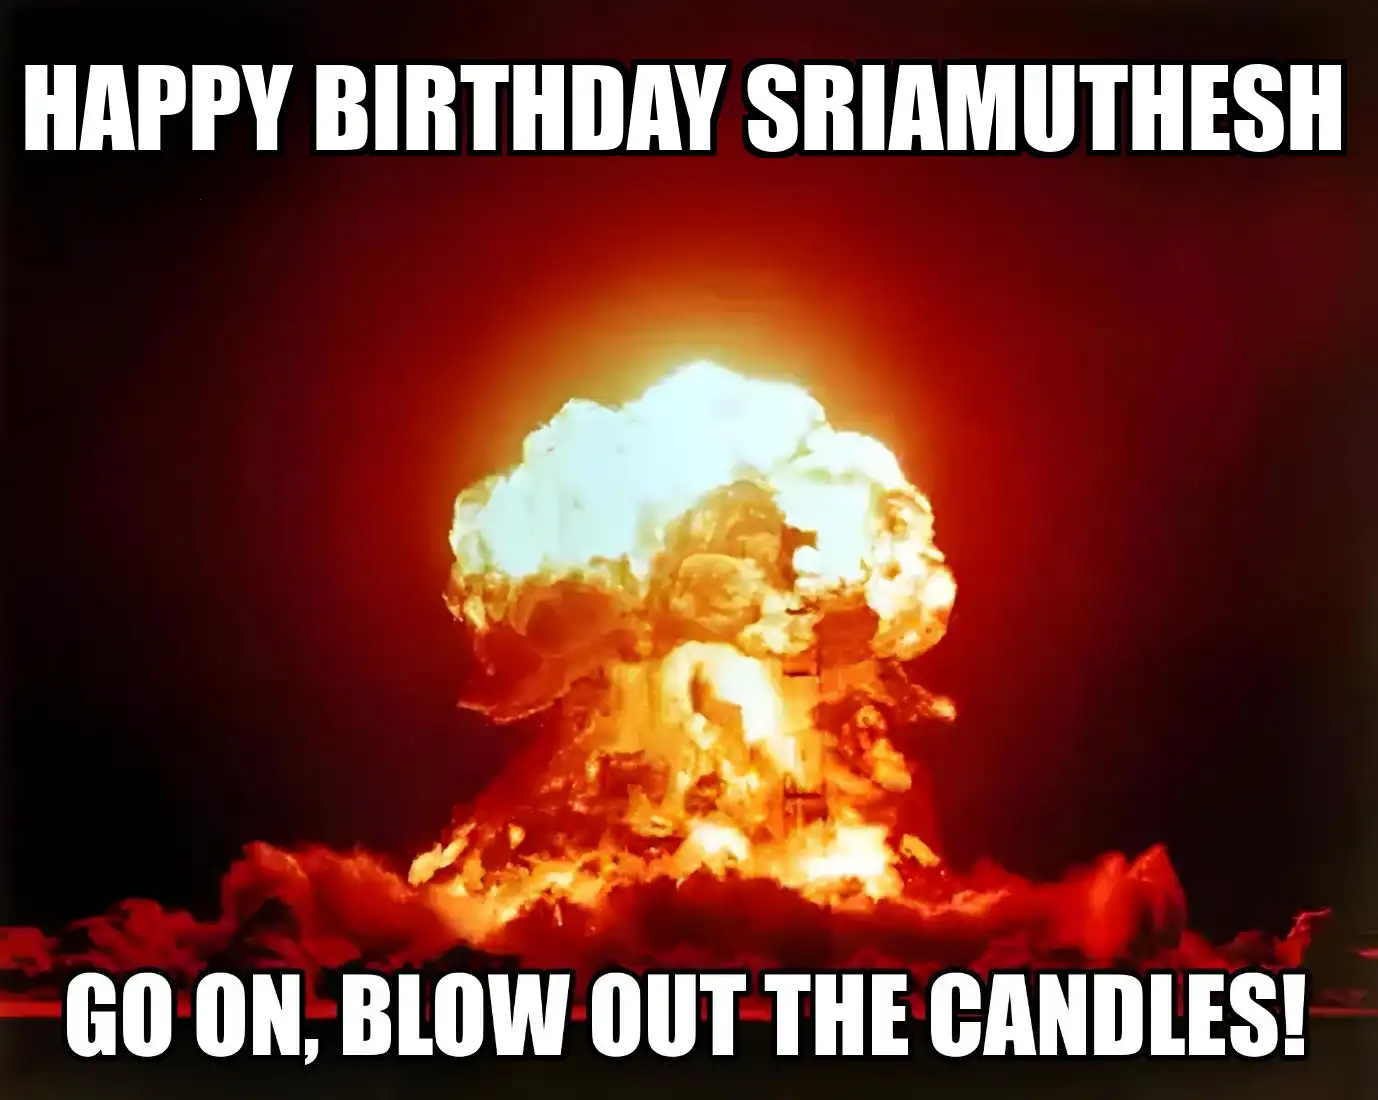 Happy Birthday Sriamuthesh Go On Blow Out The Candles Meme